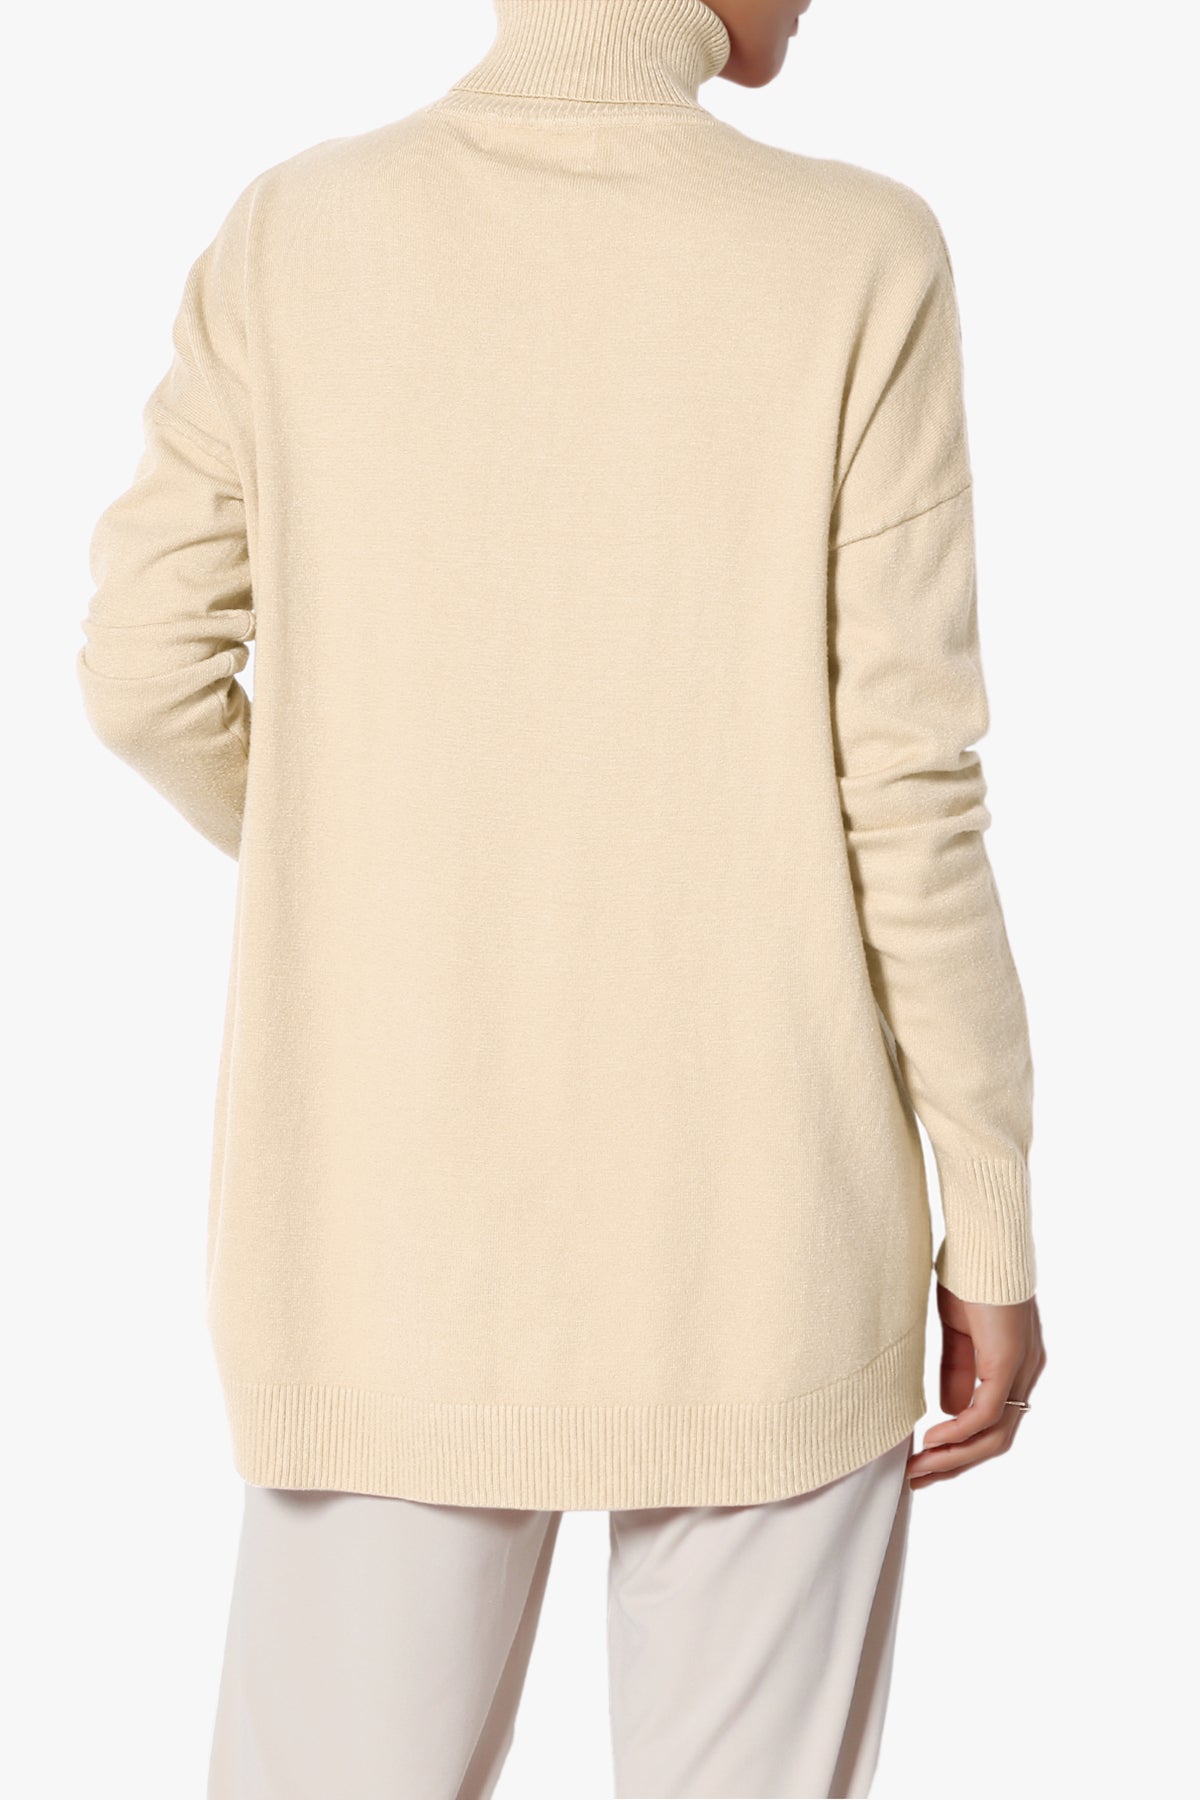 Henley Turtle Neck Knit Sweater MORE COLORS